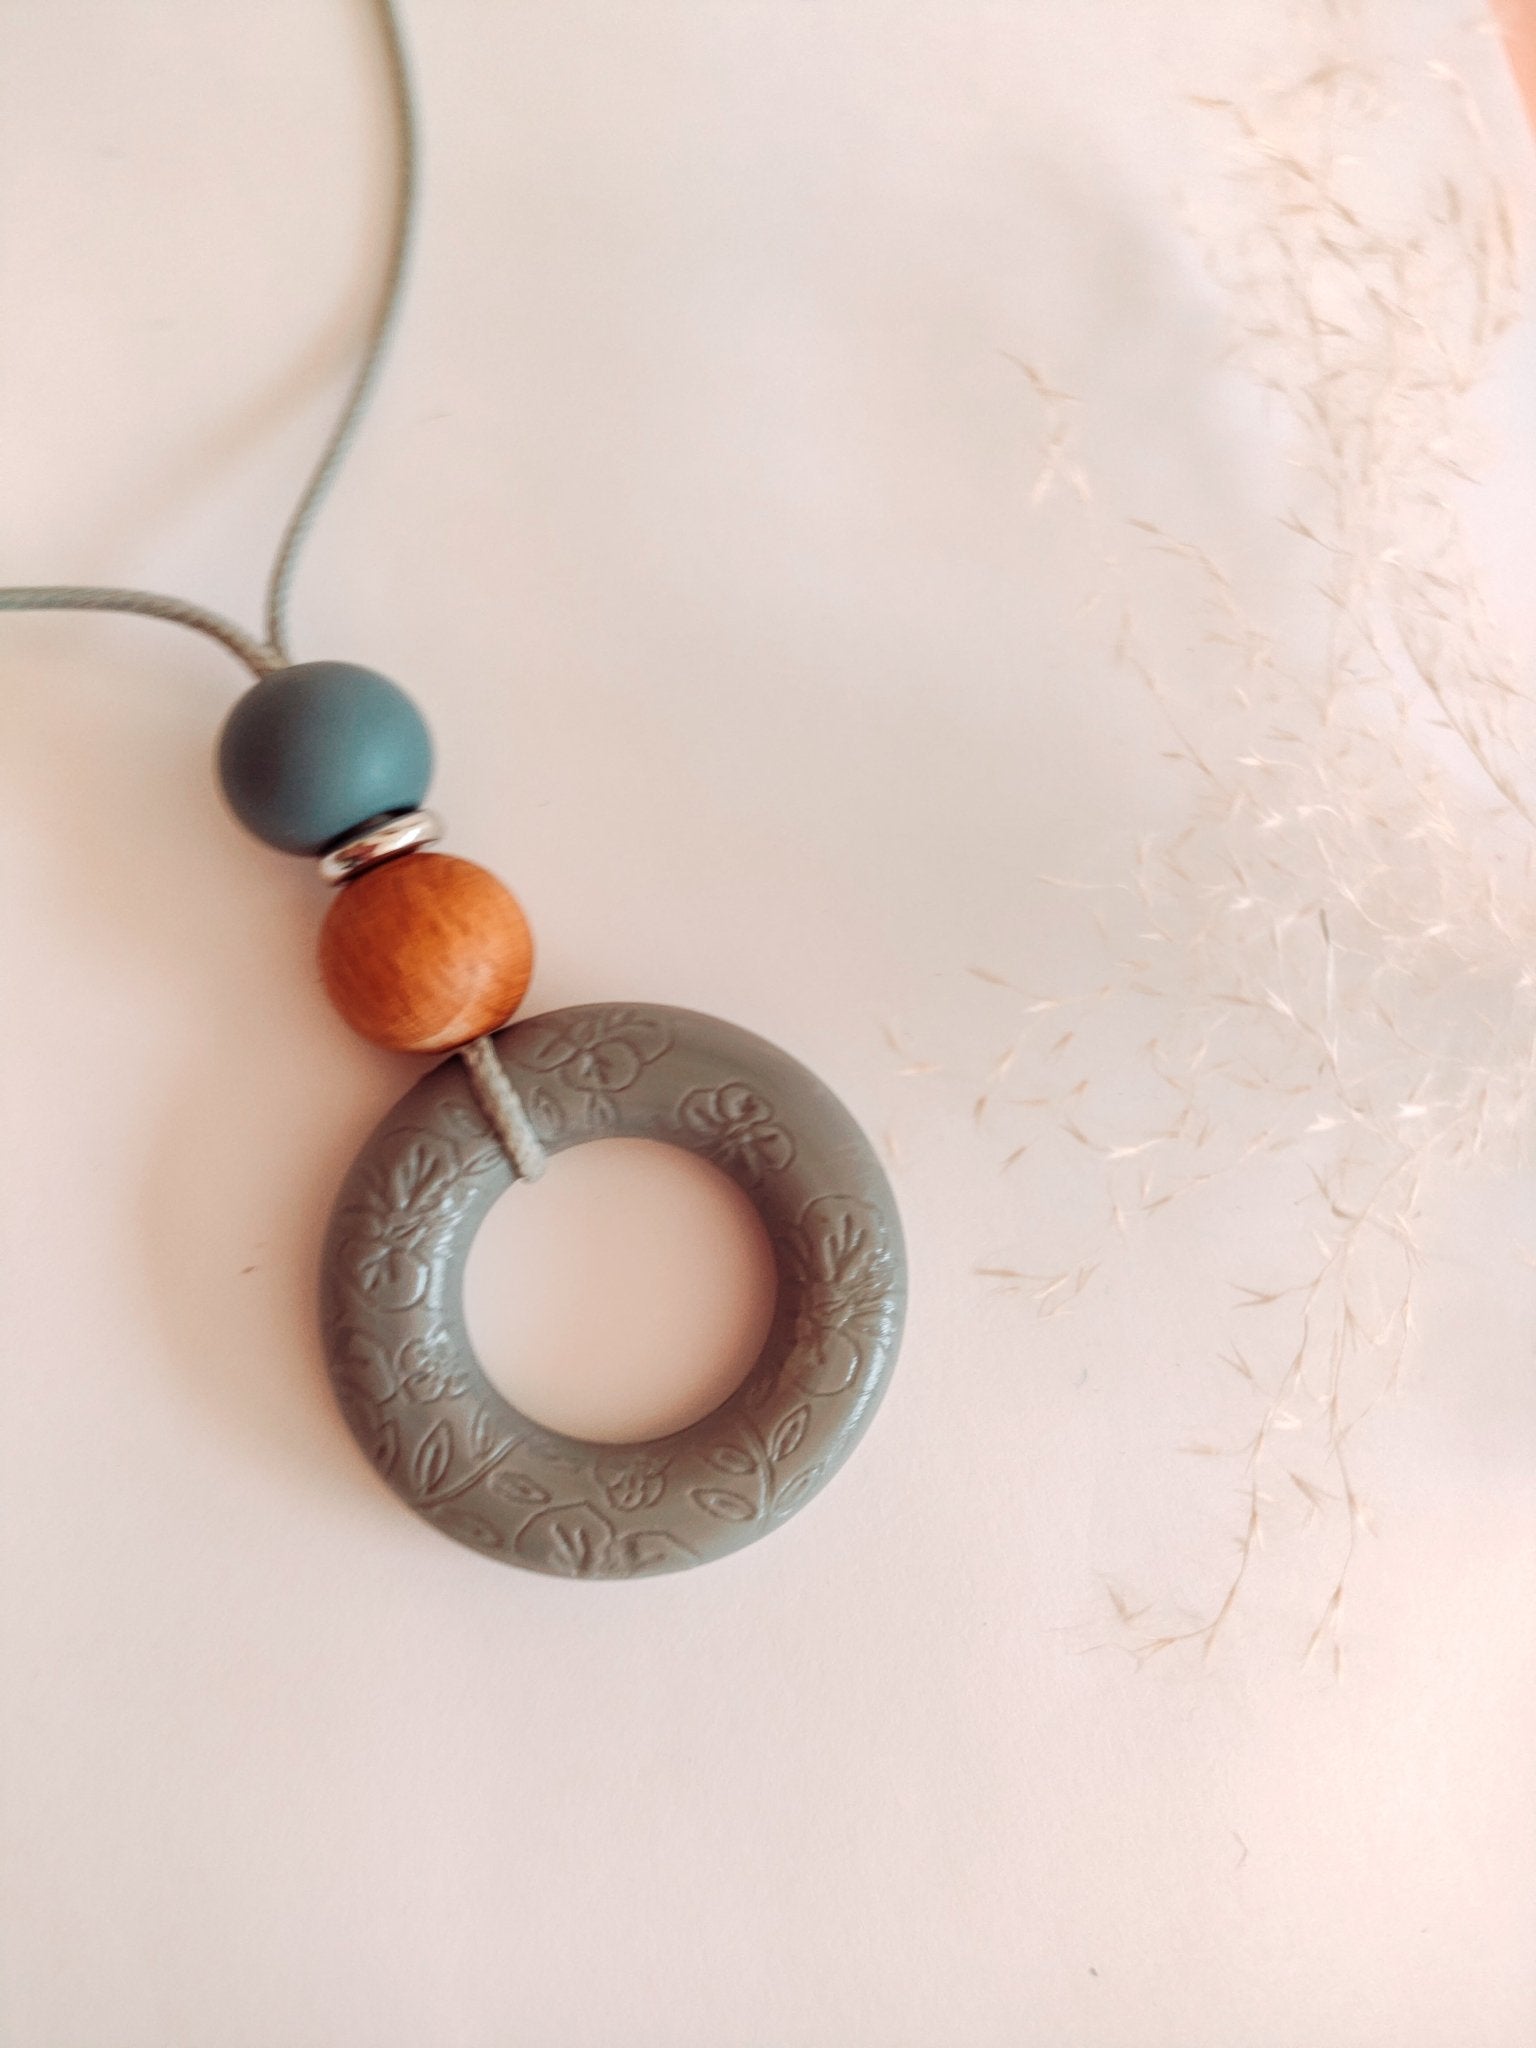 Embossed Soft Bloom Grey Pendant - Bennie Blooms Breastfeeding, Teething and Fiddle Jewellery at its finest.